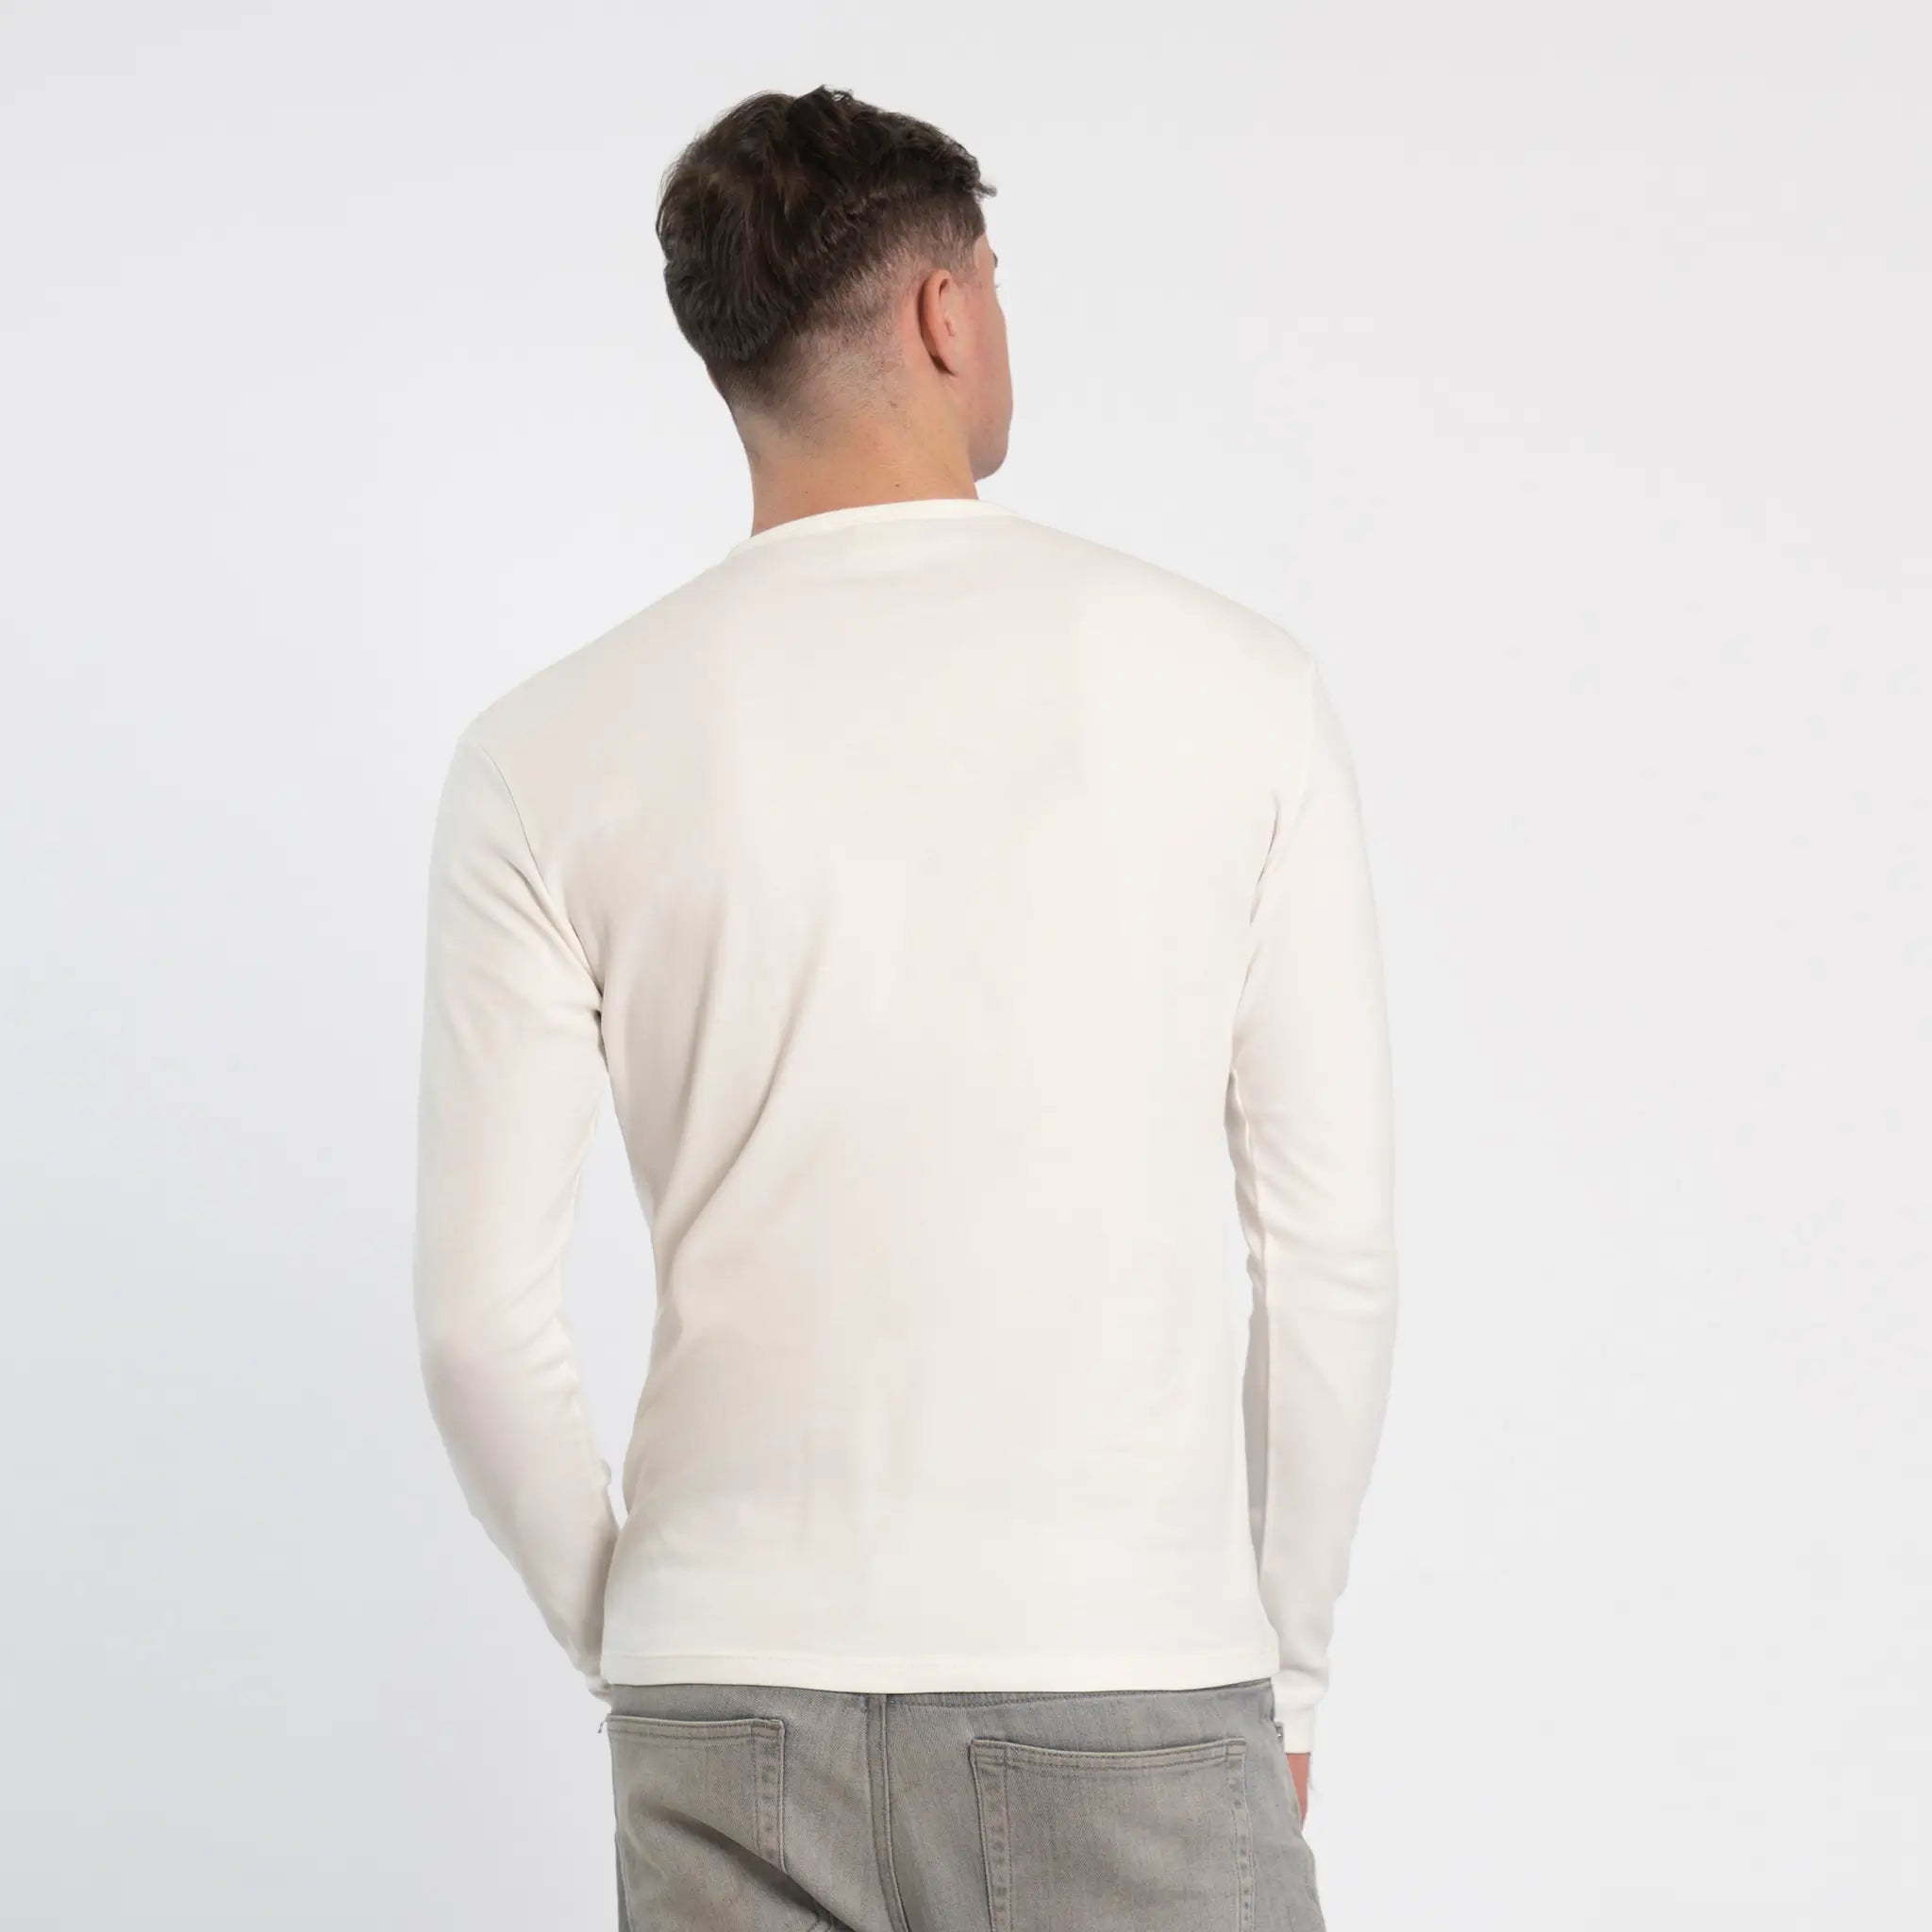 mens all occasions tshirt long sleeve color white